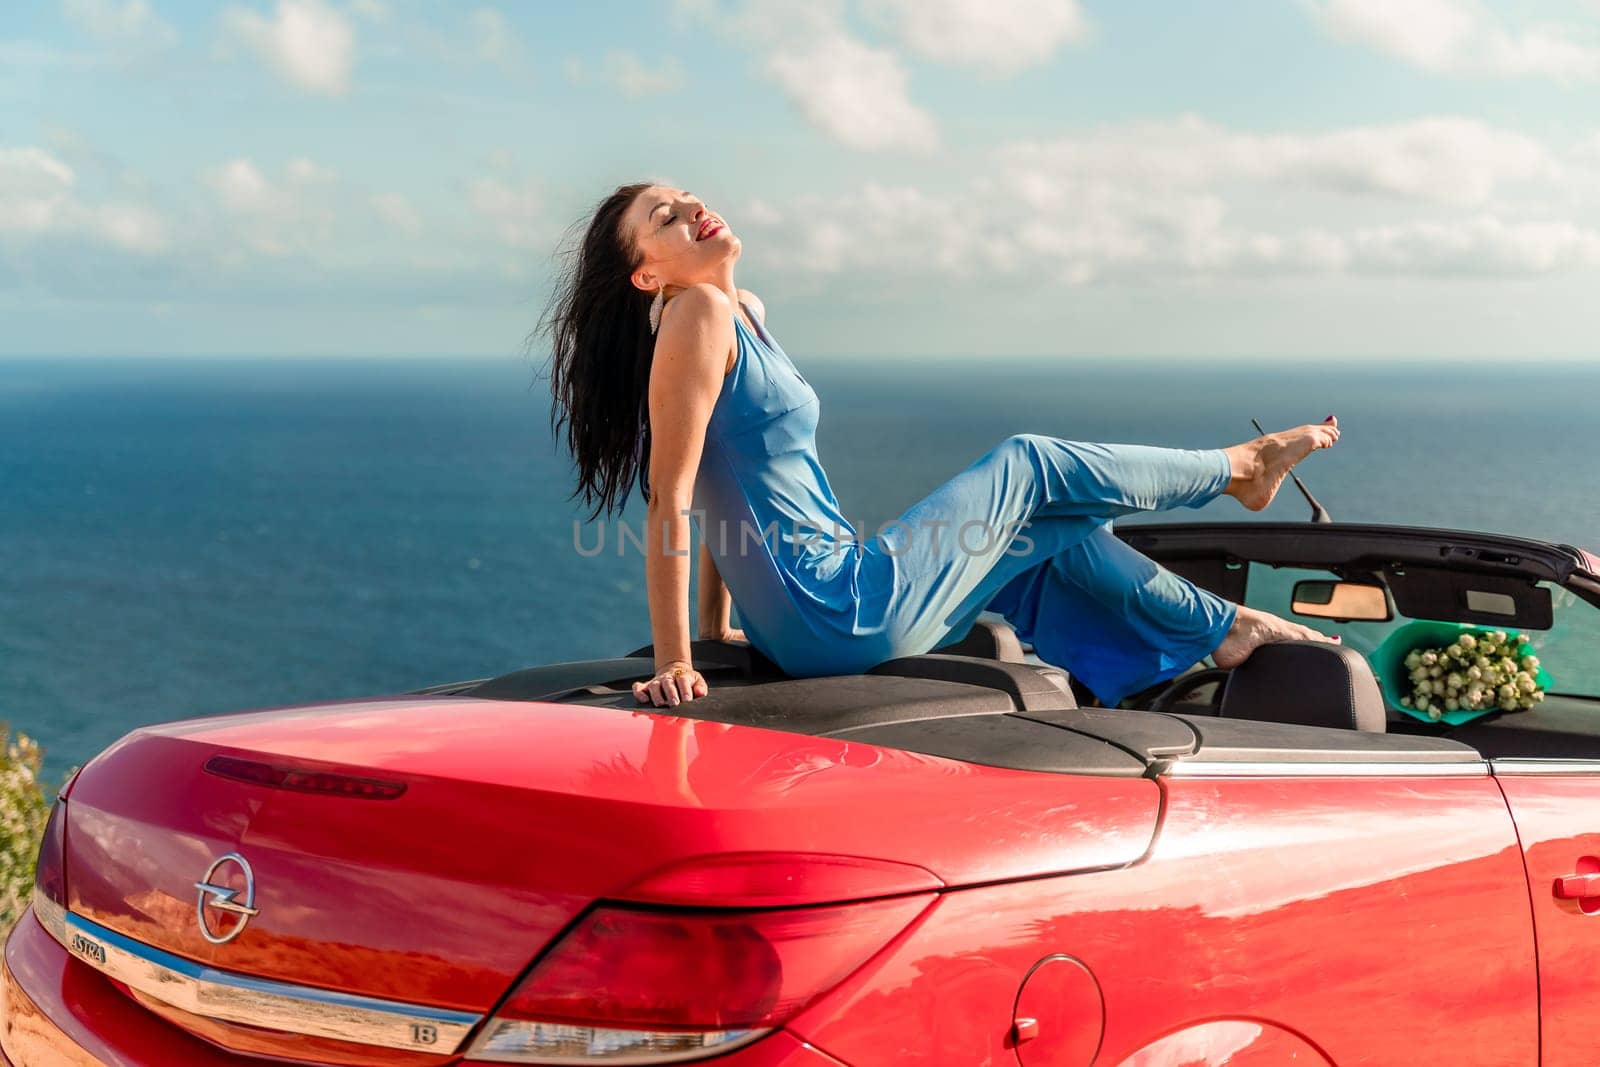 A woman is sitting in a red convertible car, smiling and enjoying the view of the ocean. Scene is happy and relaxed. by Matiunina